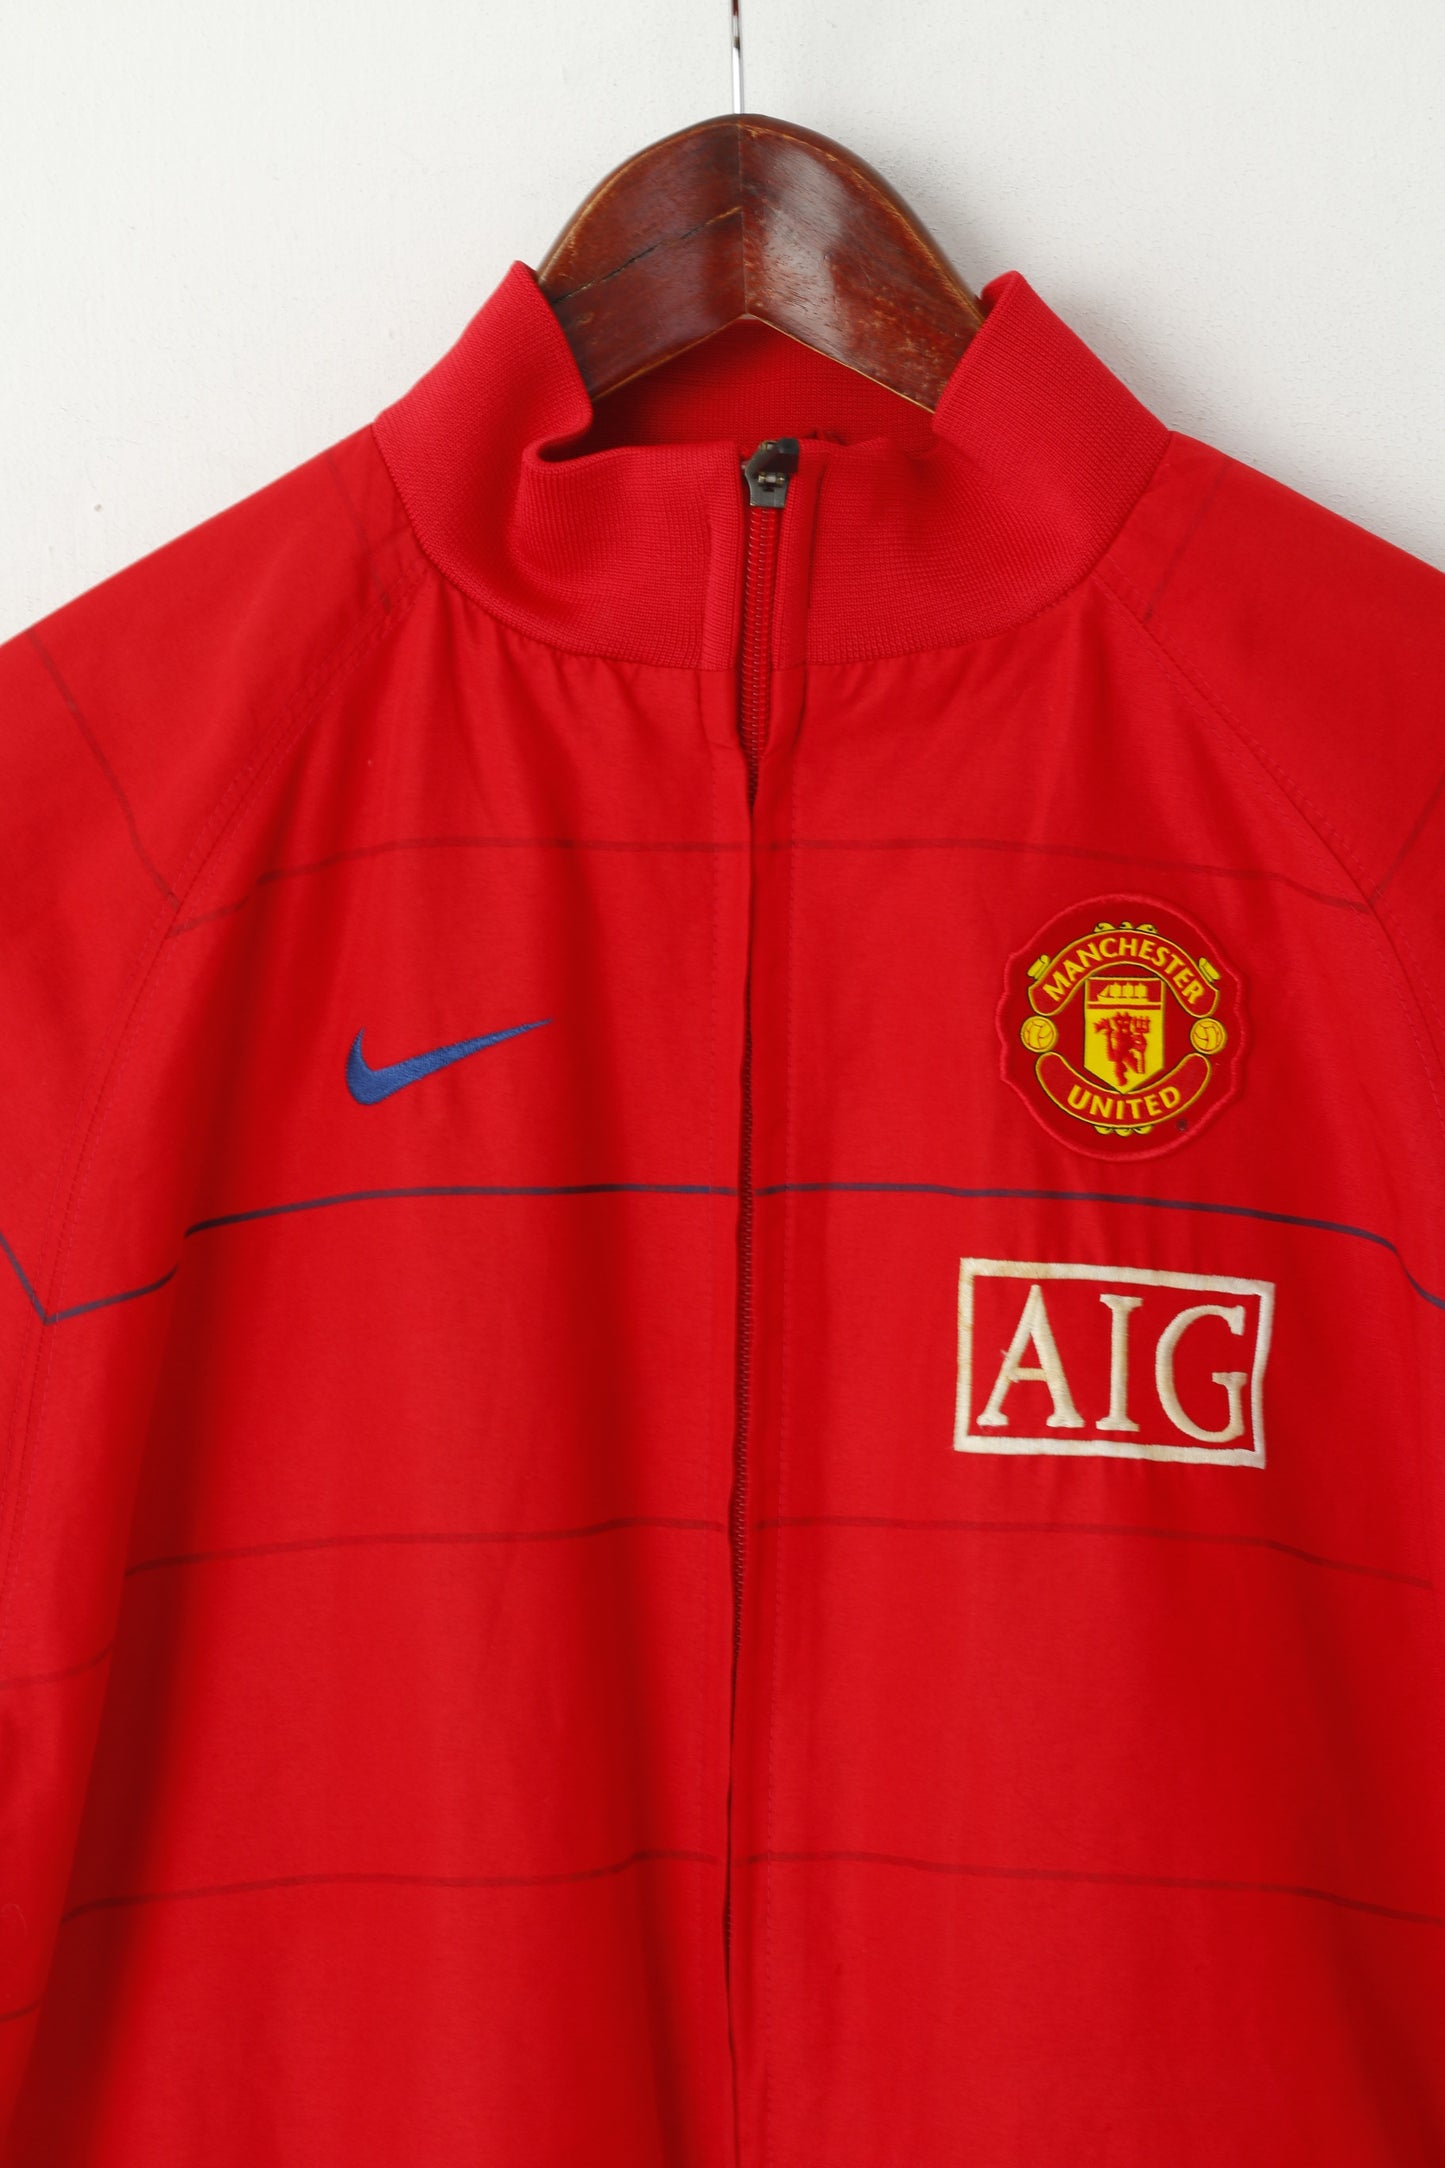 Nike Youth 13-15 Age 158-170 Jacket Red Manchester United Football Zip Up Top